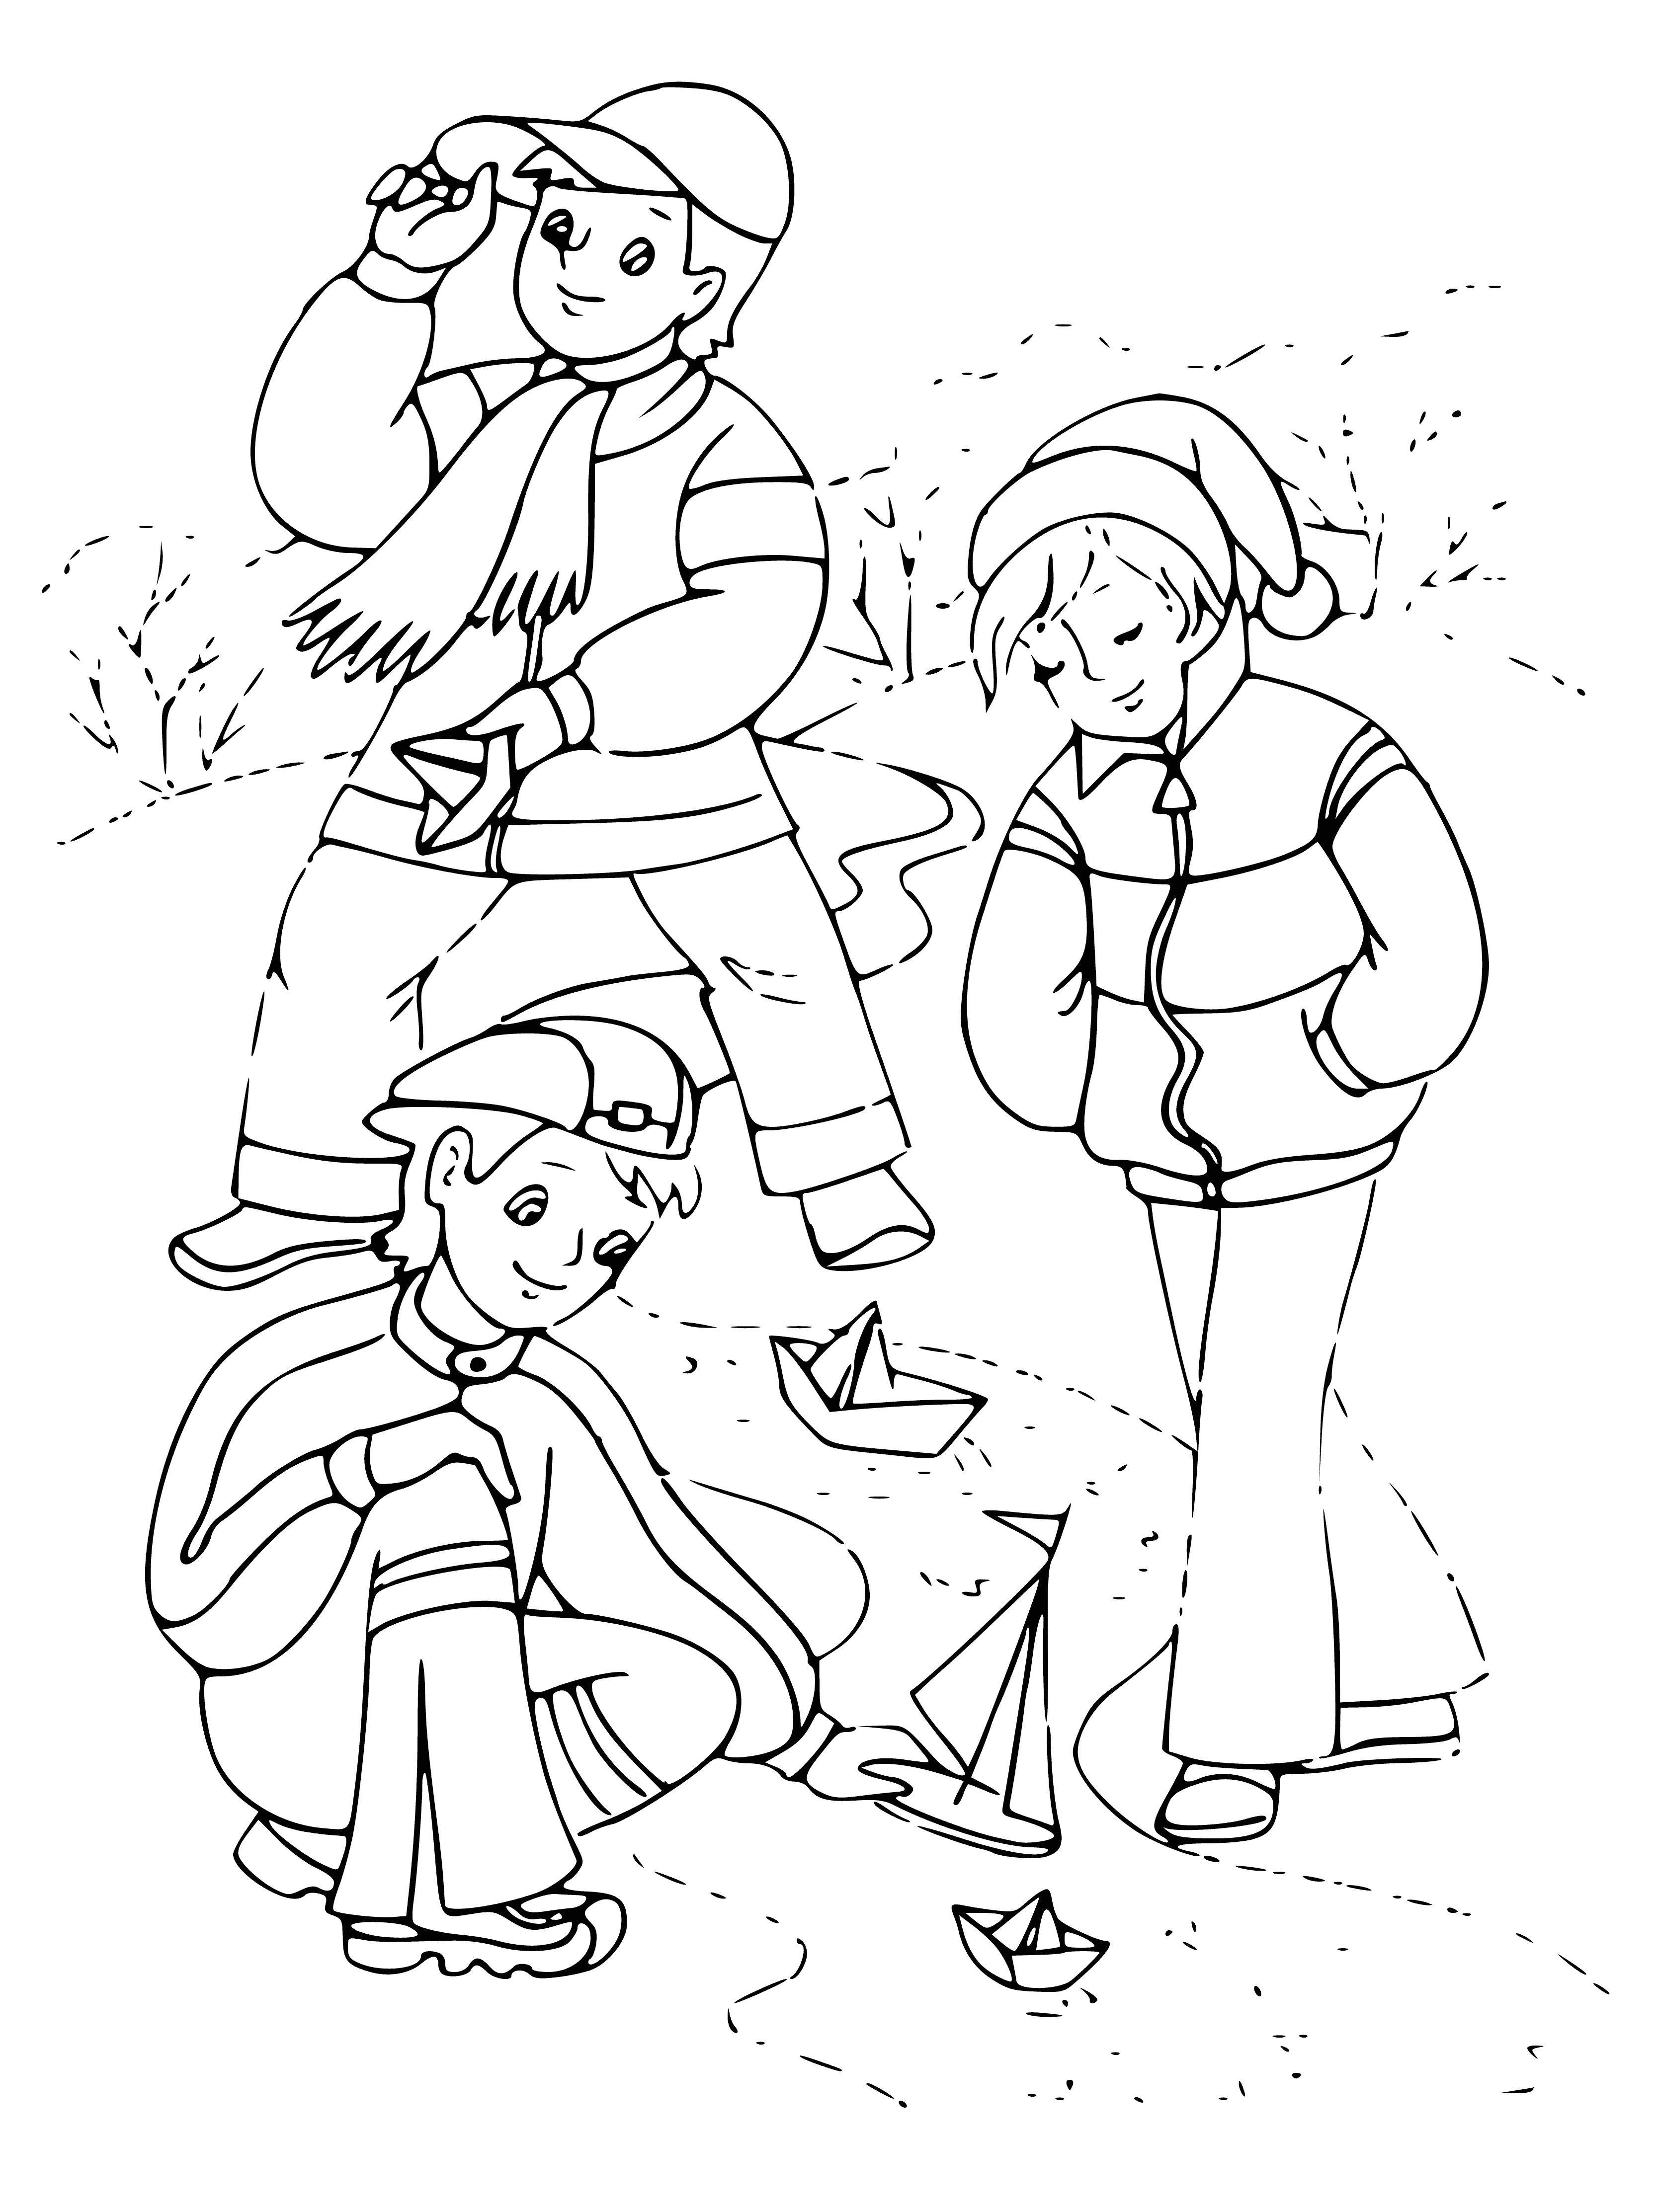 coloring page: Boys launching boats in a brook, having fun as boats float downstream.